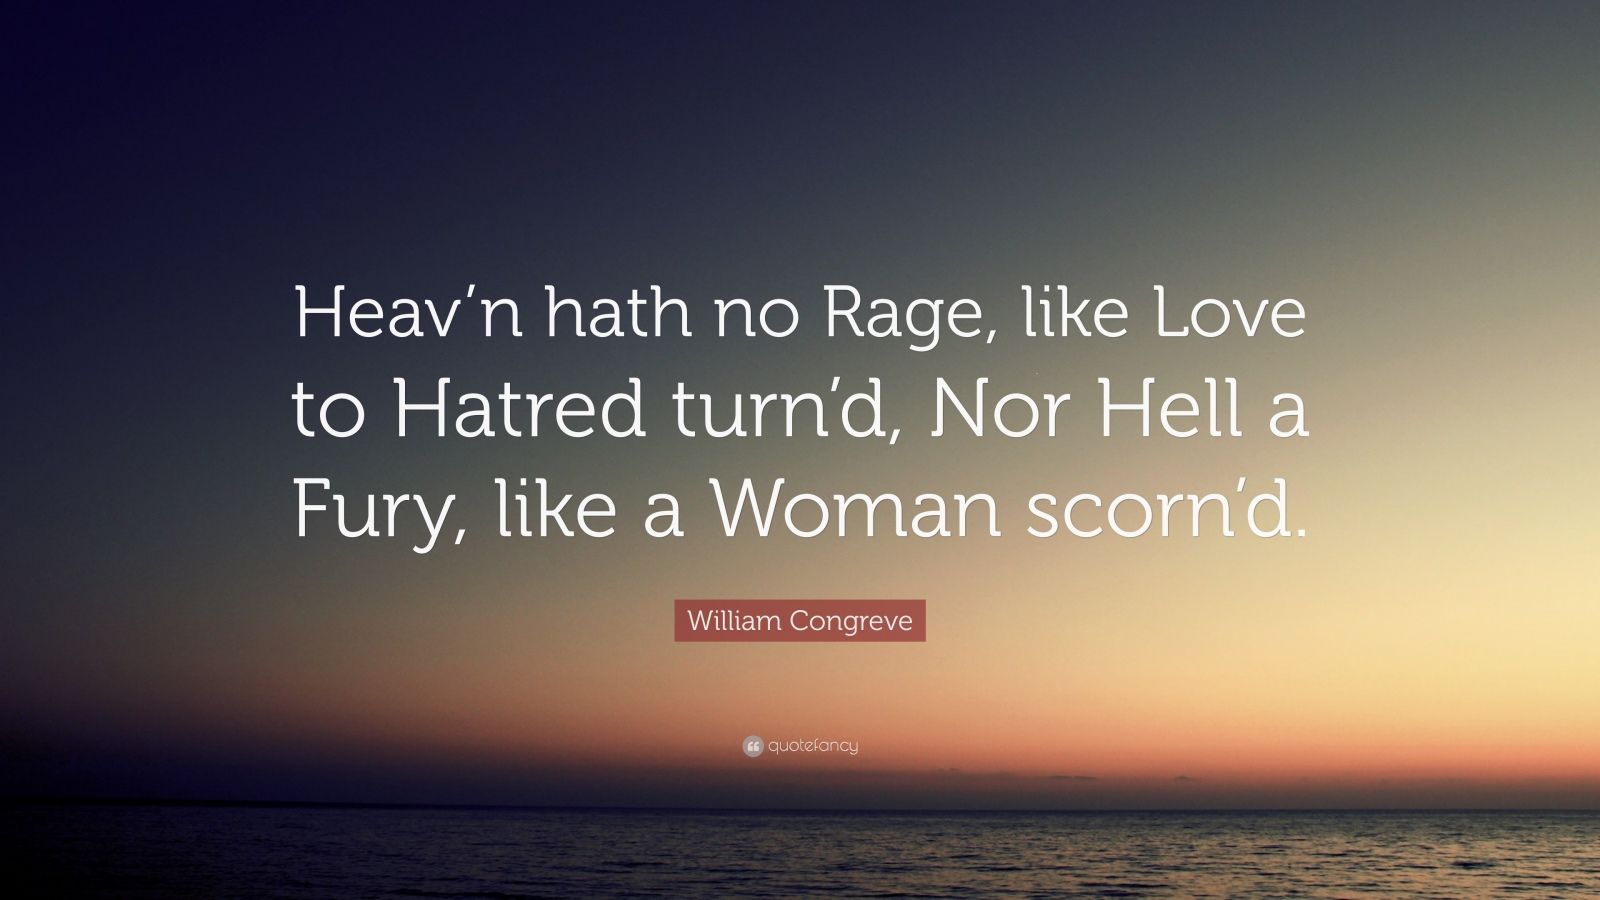 William Congreve Quote “heavn Hath No Rage Like Love To Hatred Turnd Nor Hell A Fury Like